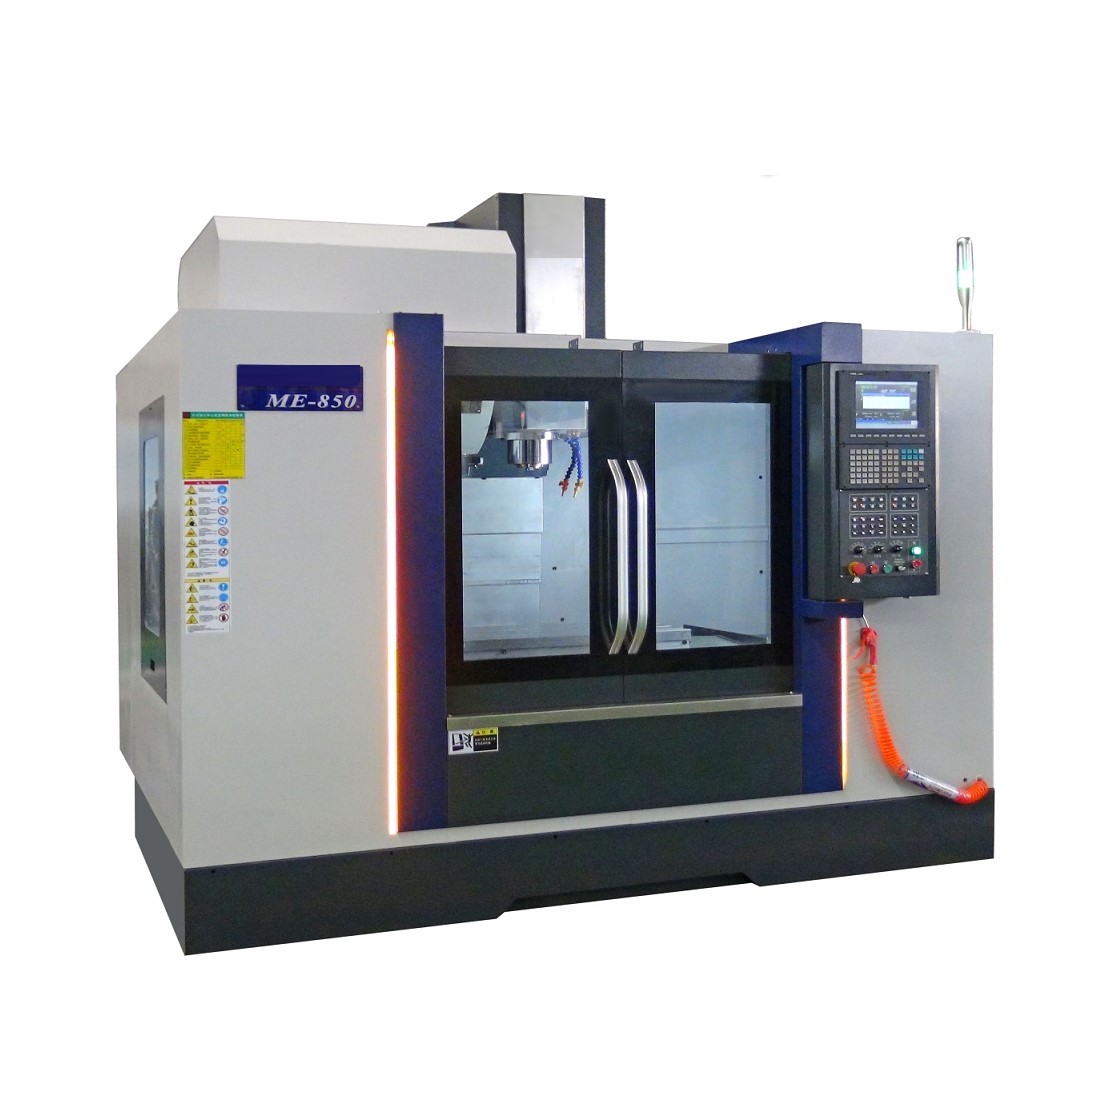 HDME500 VMC500 cnc vertical machining center 3 axis cnc milling machine 4axis cnc machinery wholesale supplier manufactures